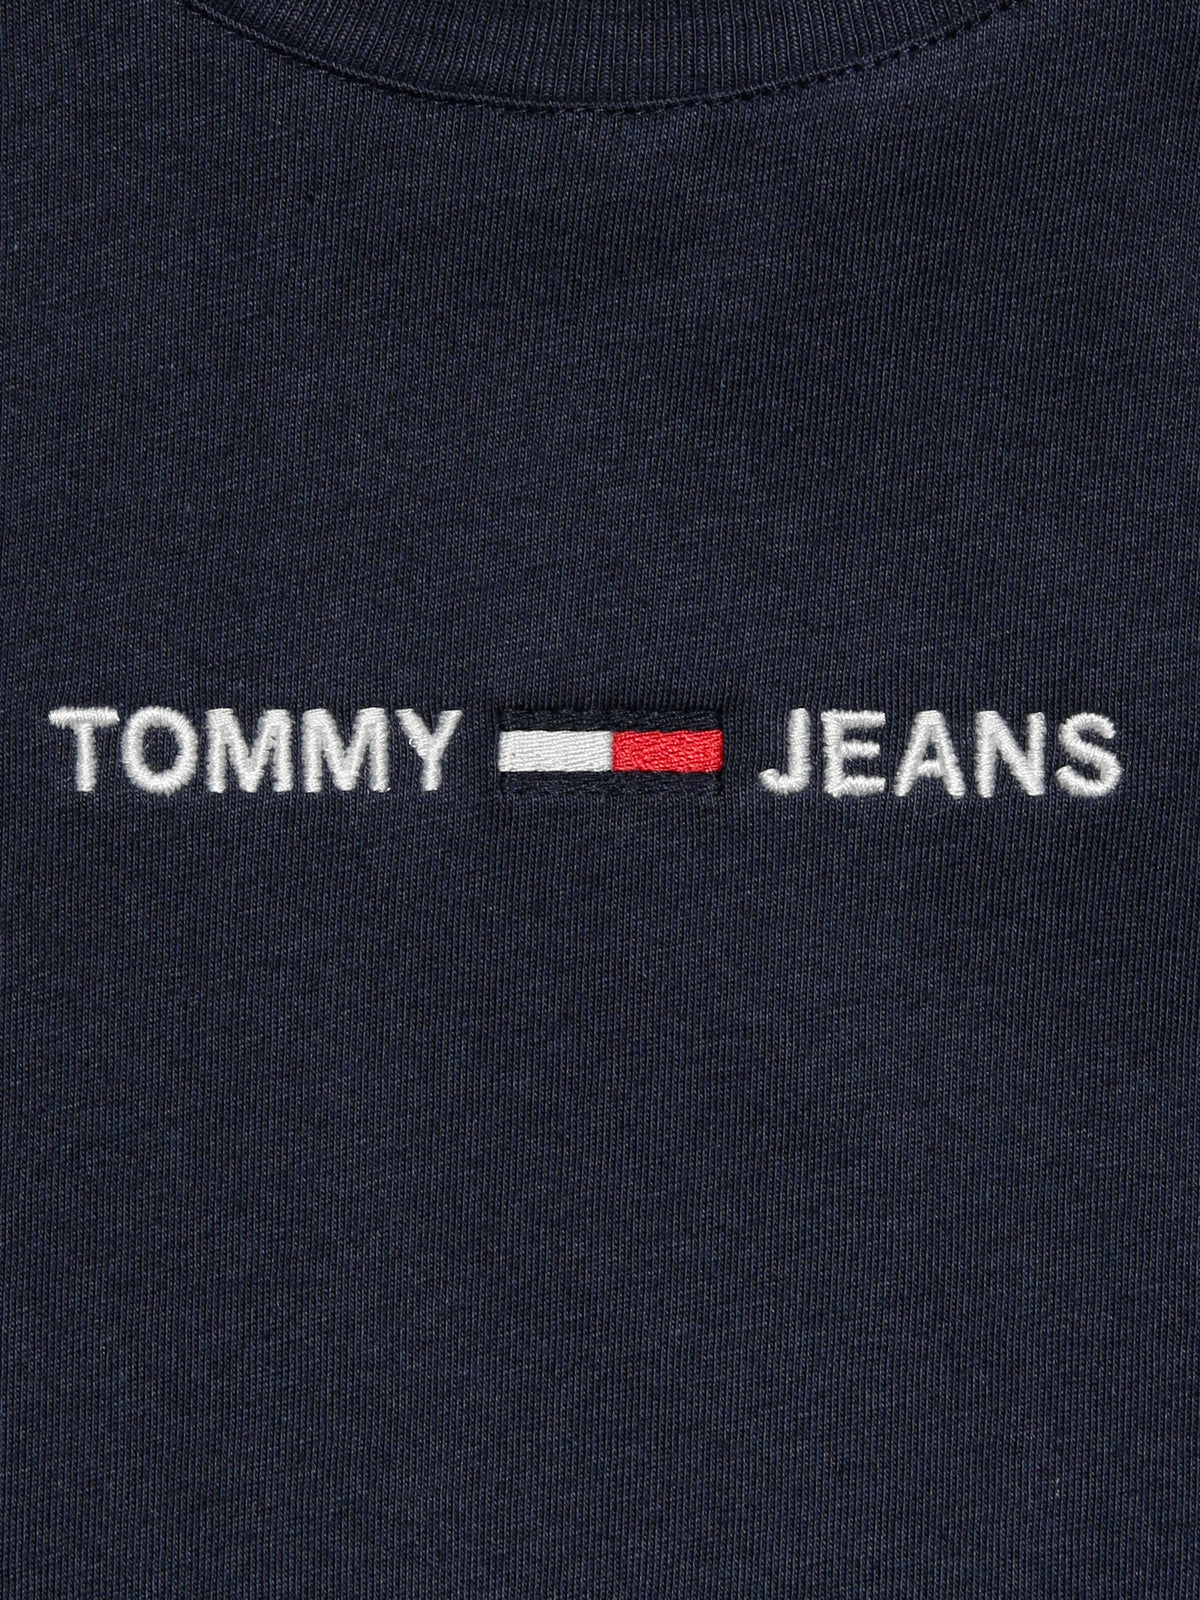 Small Text T-Shirt in Twilight Navy